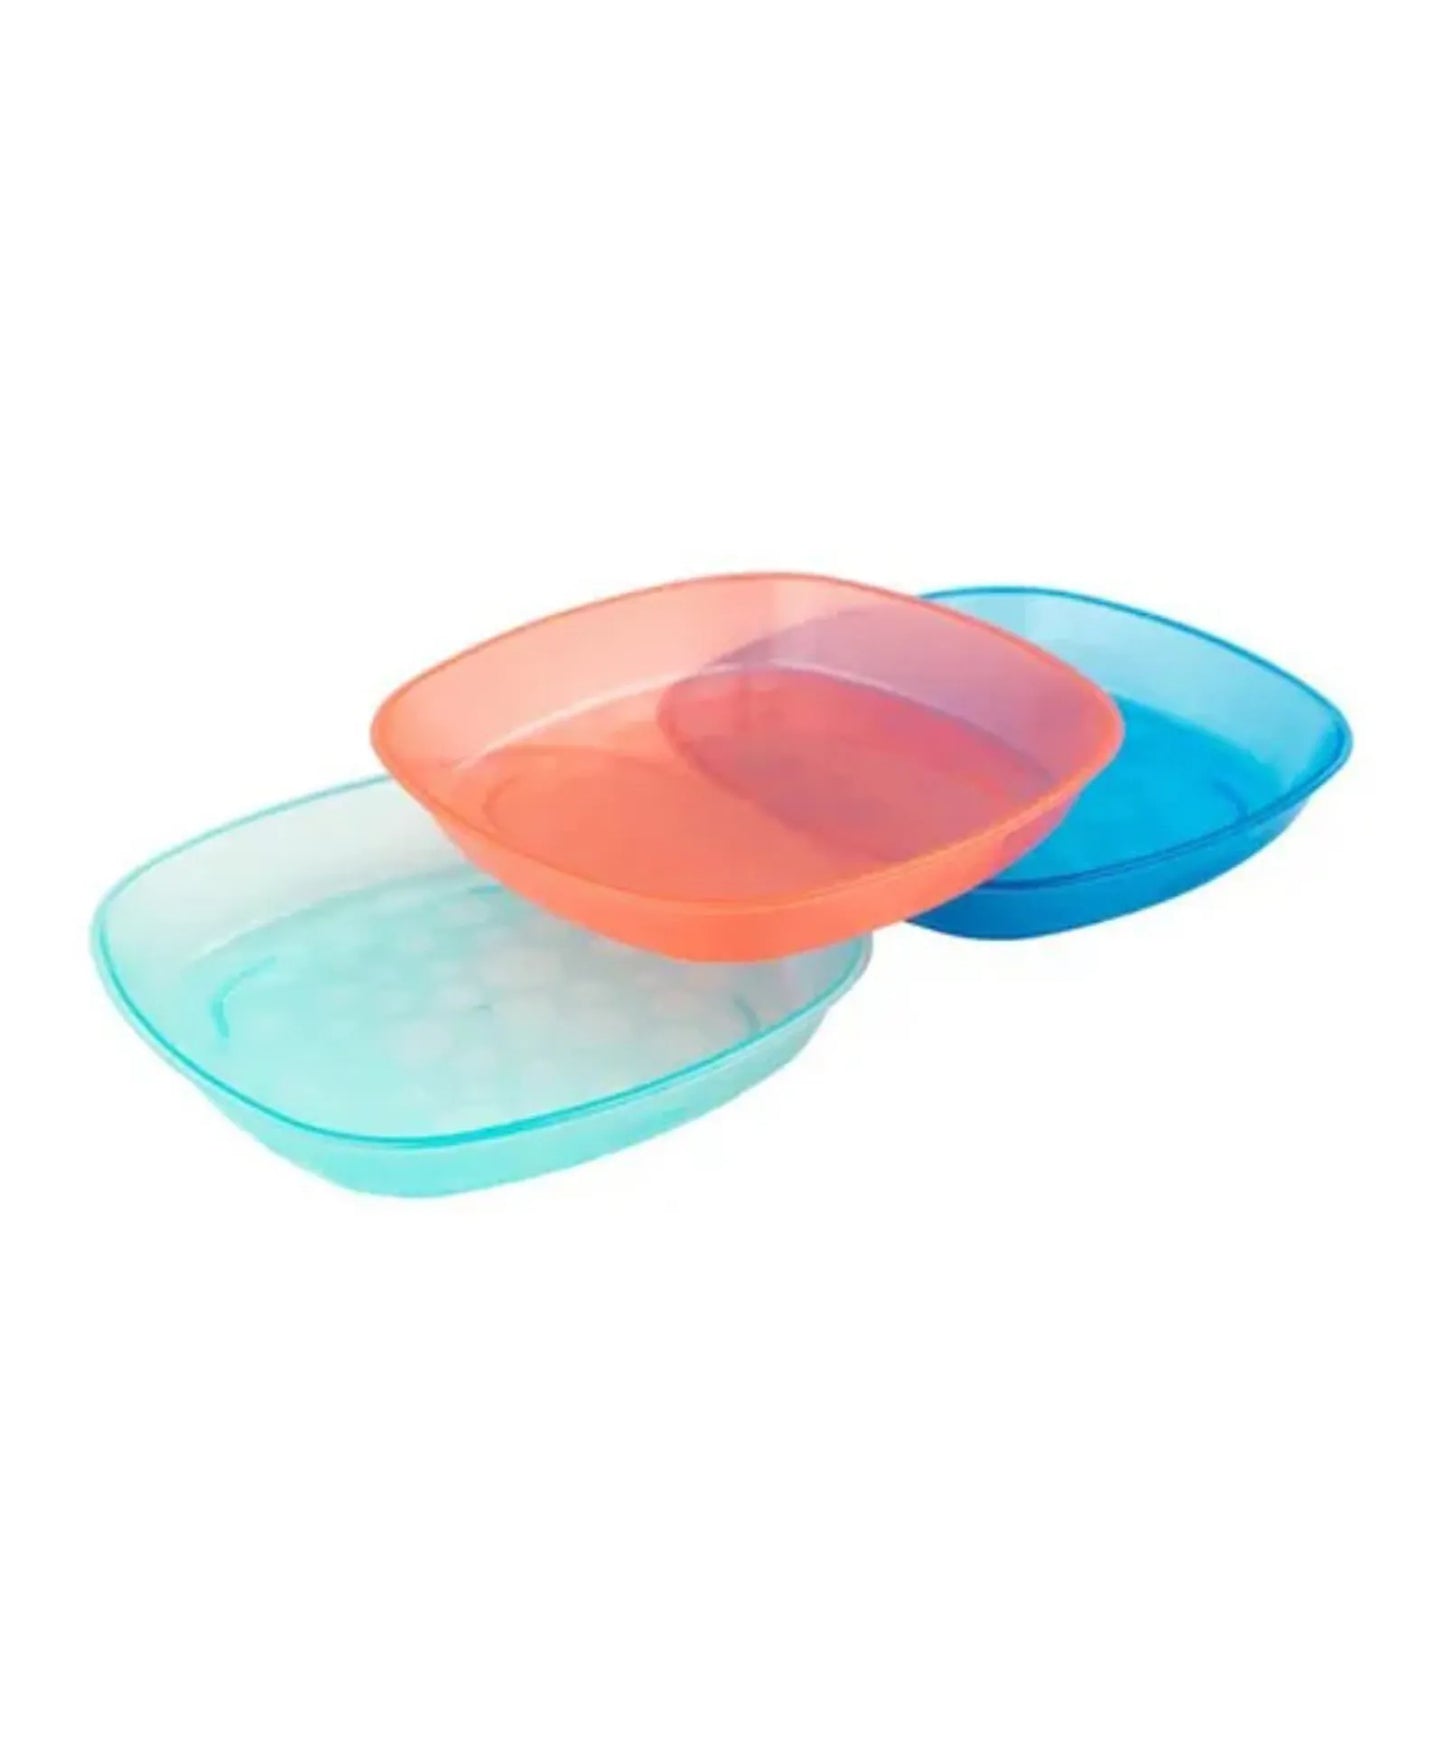 Dr. Brown's Toddler Plates - Pack of 3